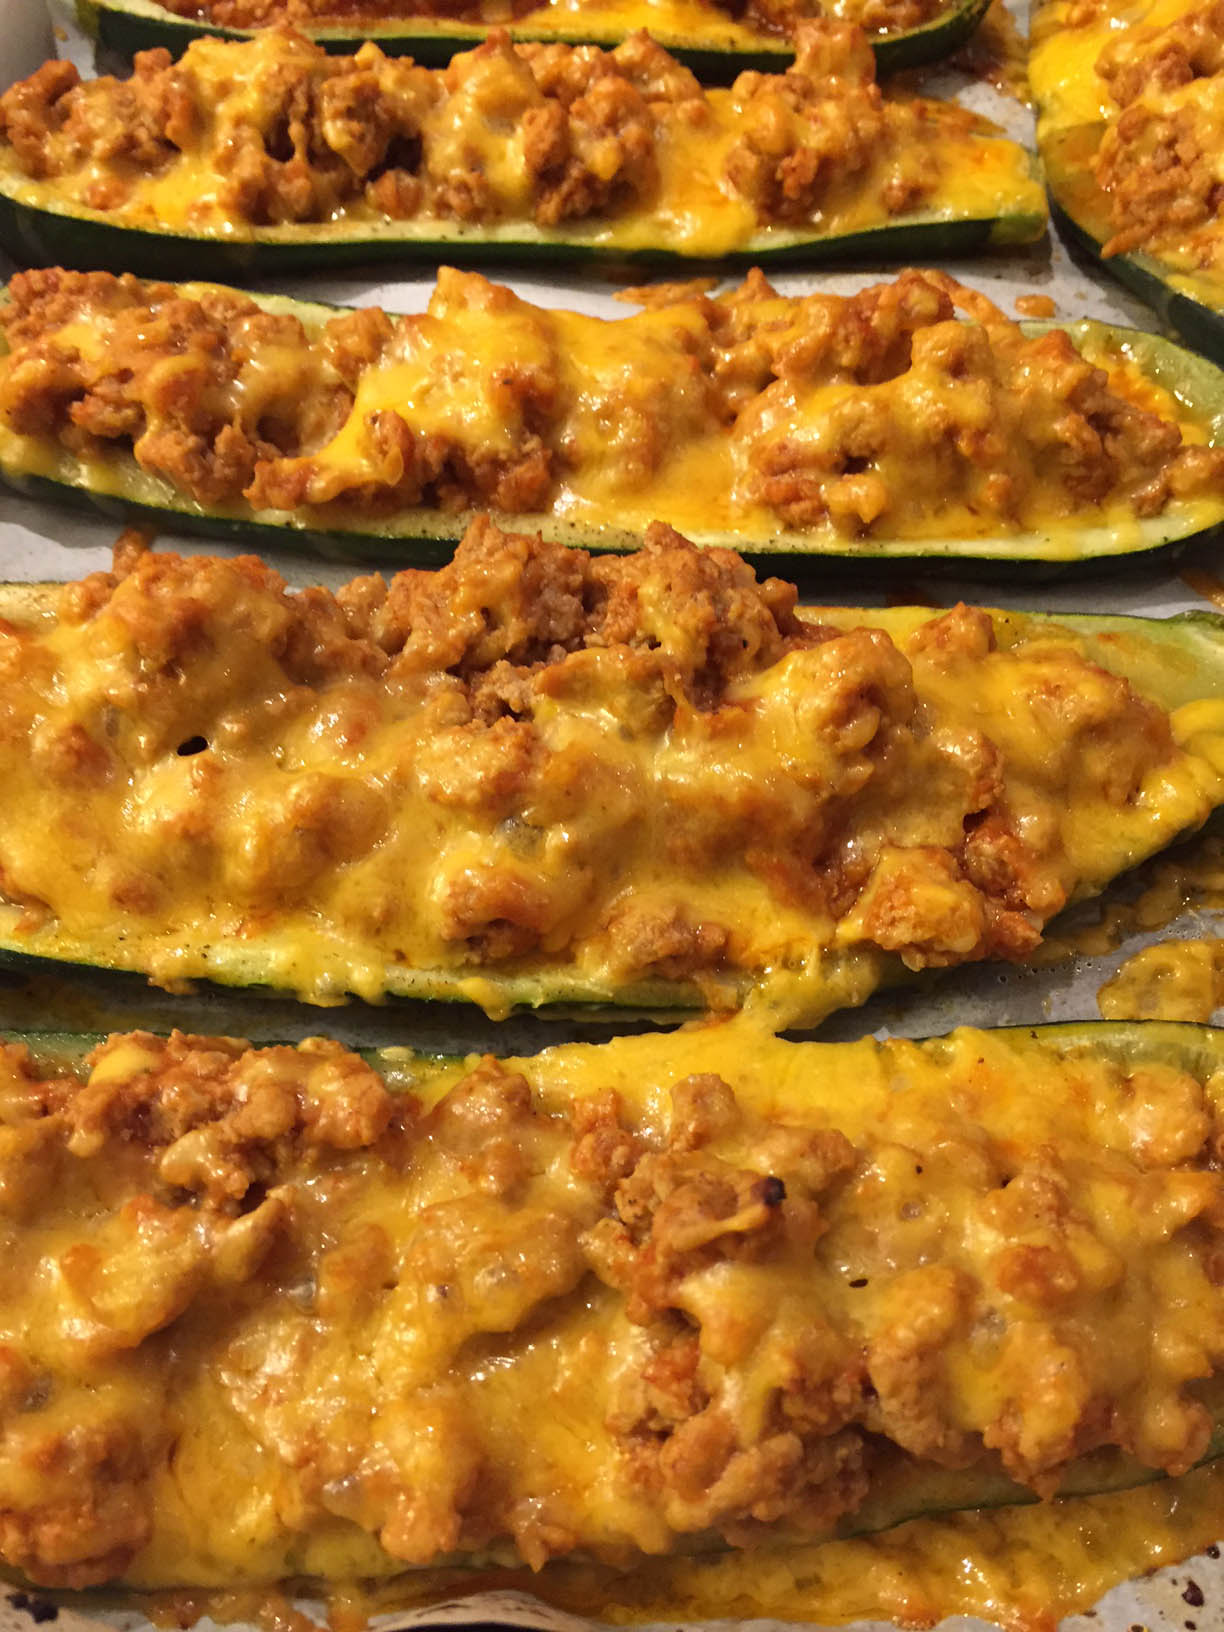 Stuffed Baked Zucchini Boats With Ground Meat And Cheese